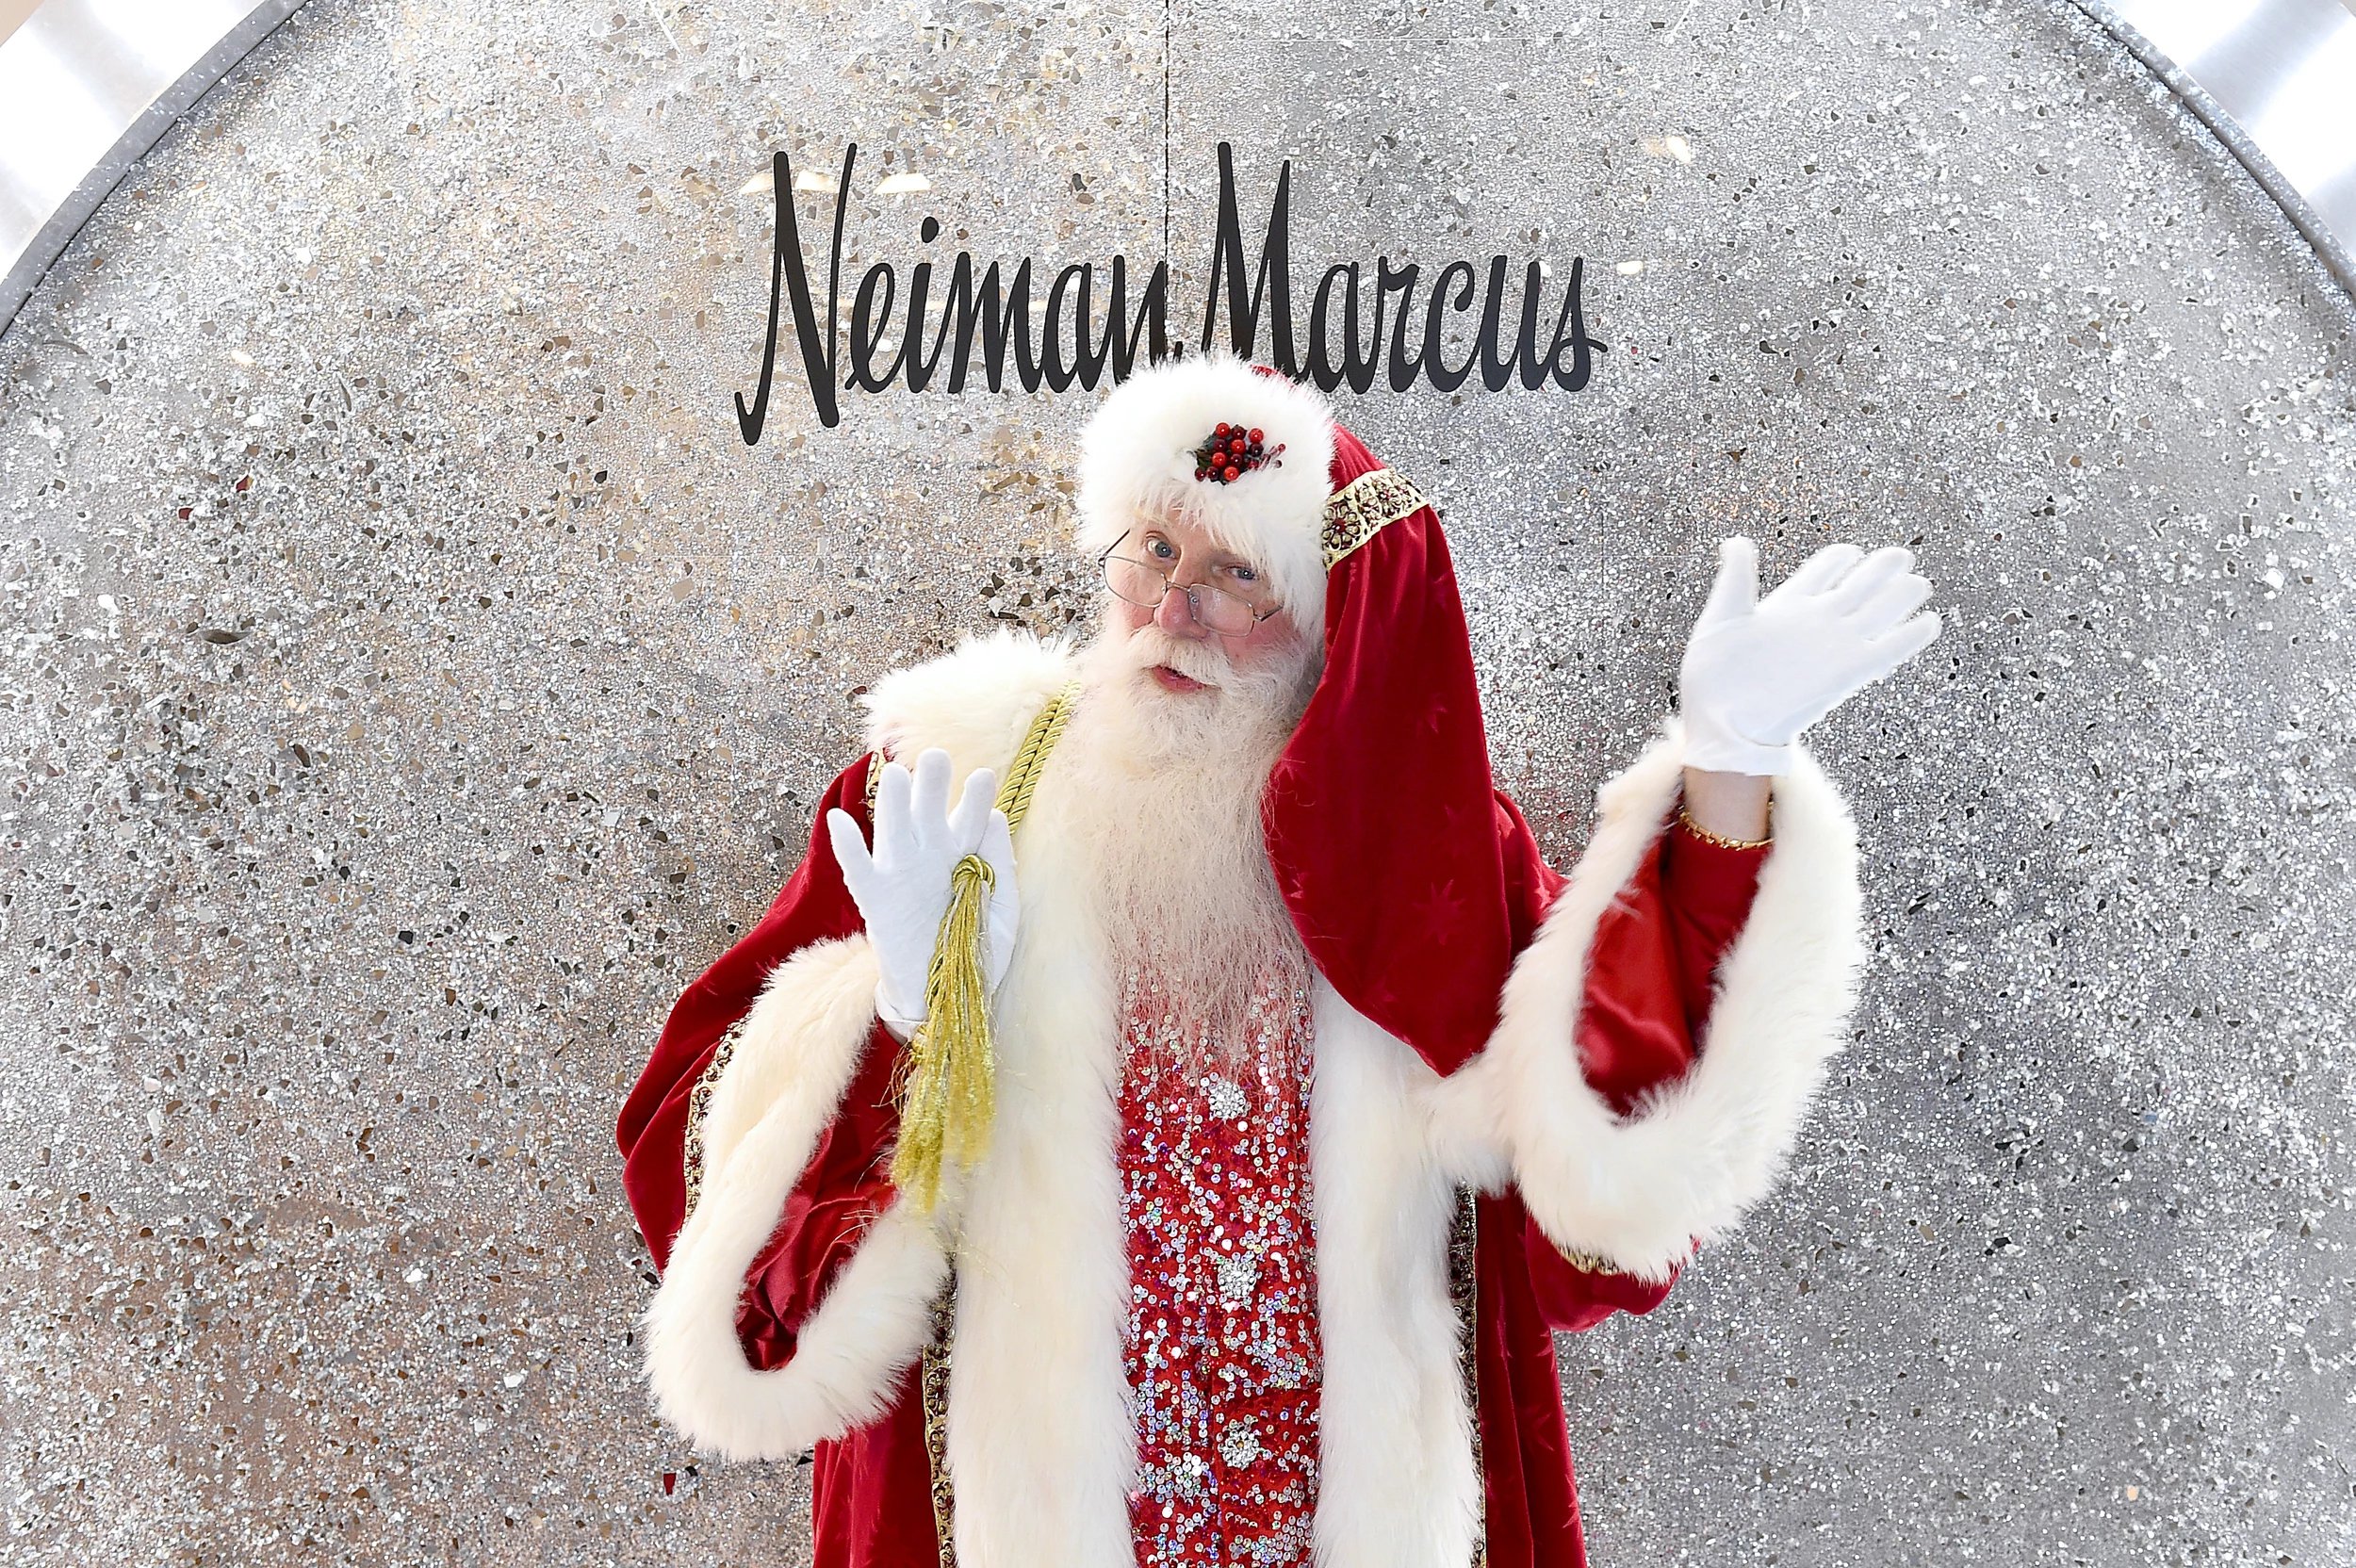 Neiman Marcus Downtown Dallas has just the tree for holiday blingy